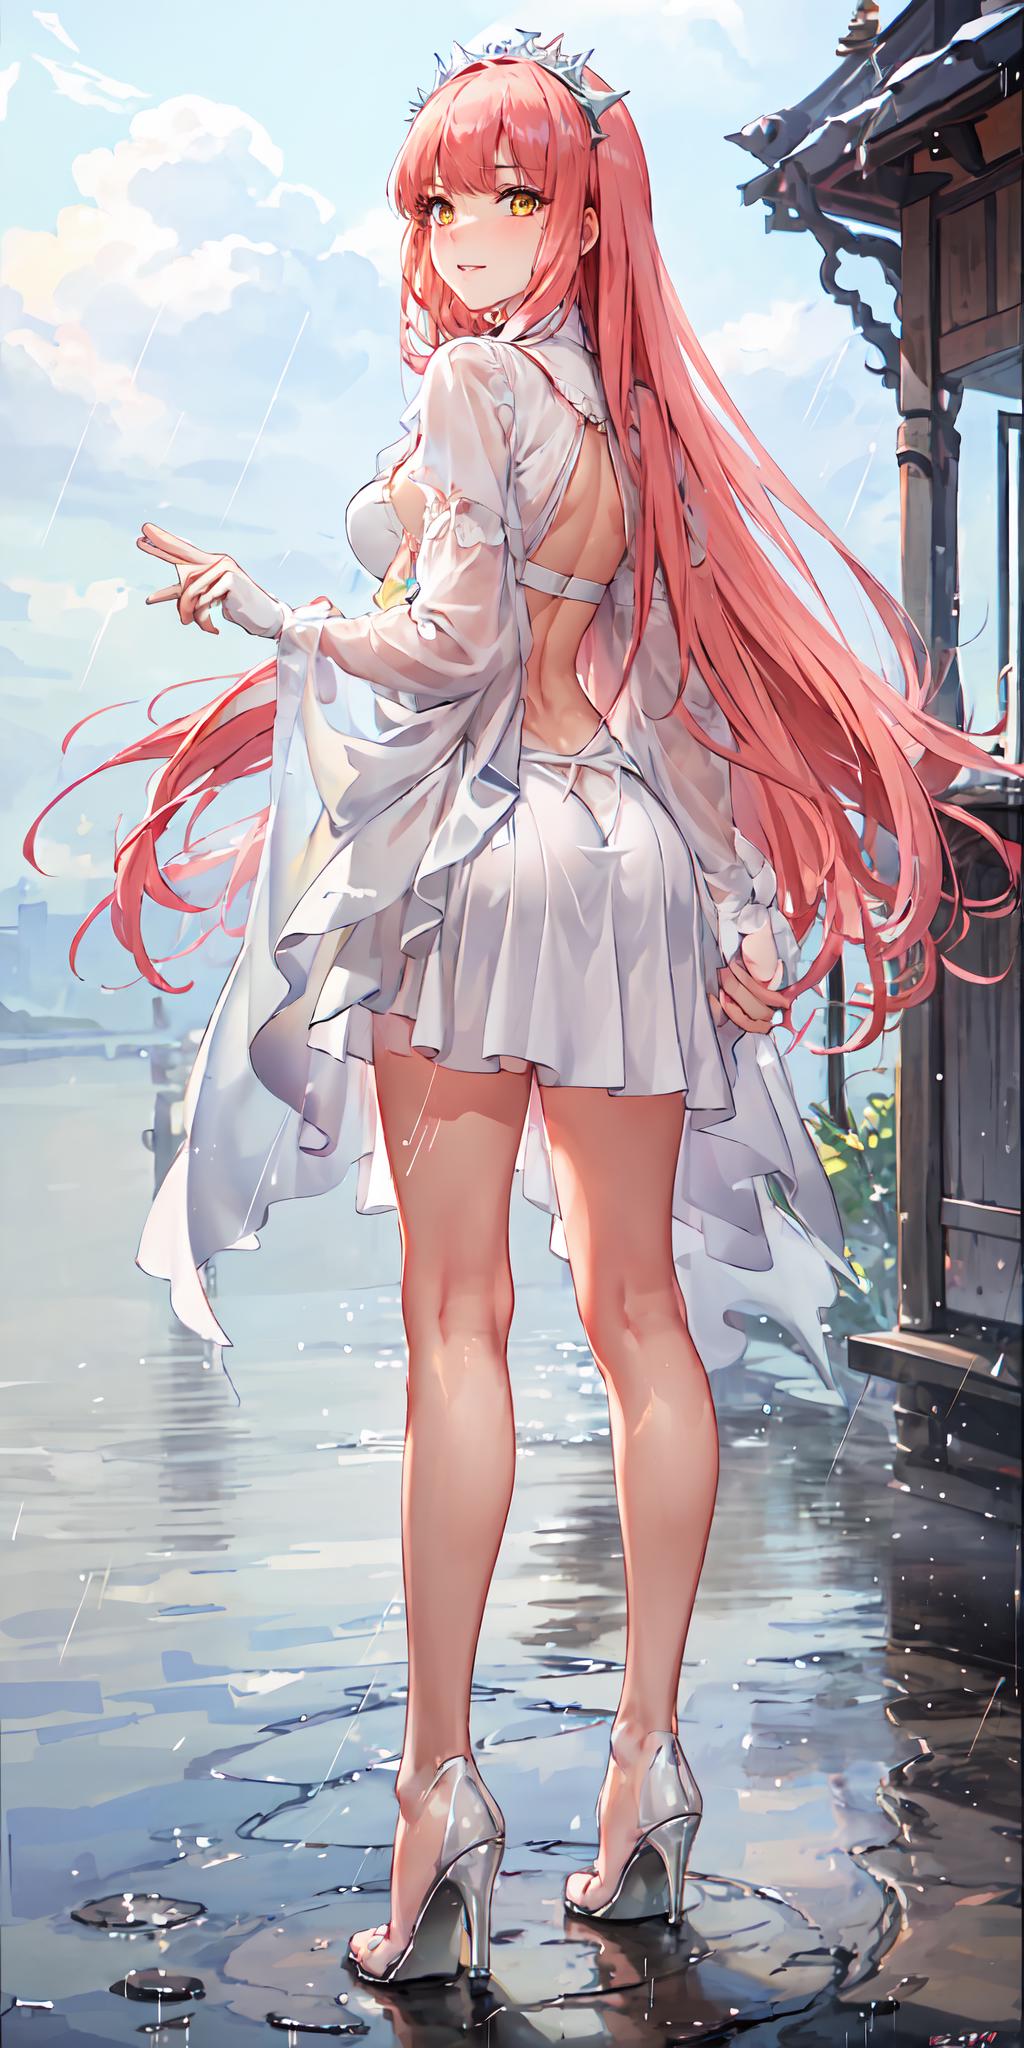 Queen Medb (Fate/Grand Order) image by ResBas